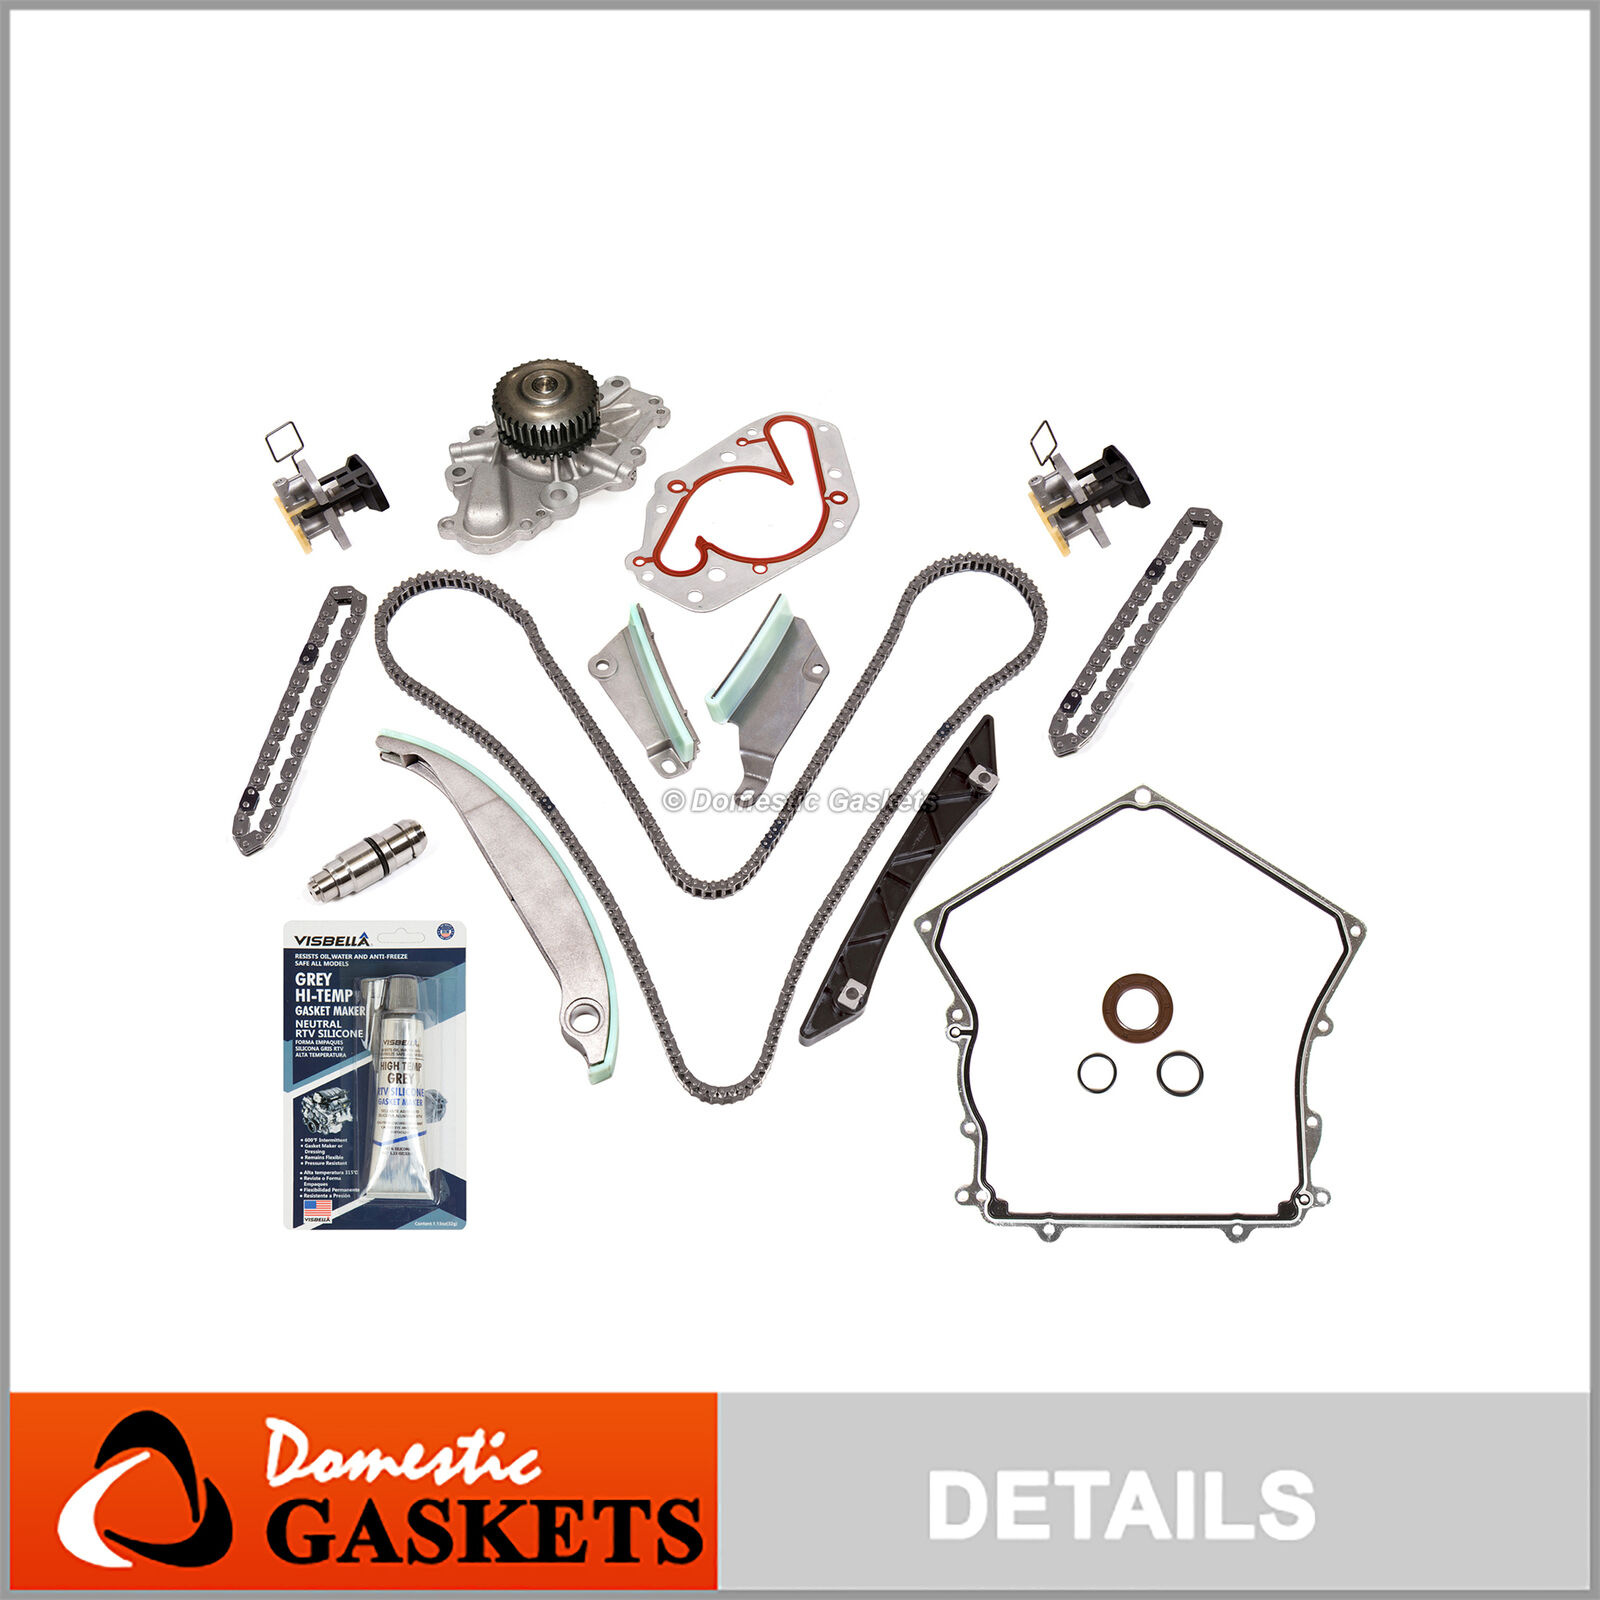 09-10 Dodge Charger Chrysler 300 2.7 Timing Chain Water Pump Kit+Tensioner+Cover